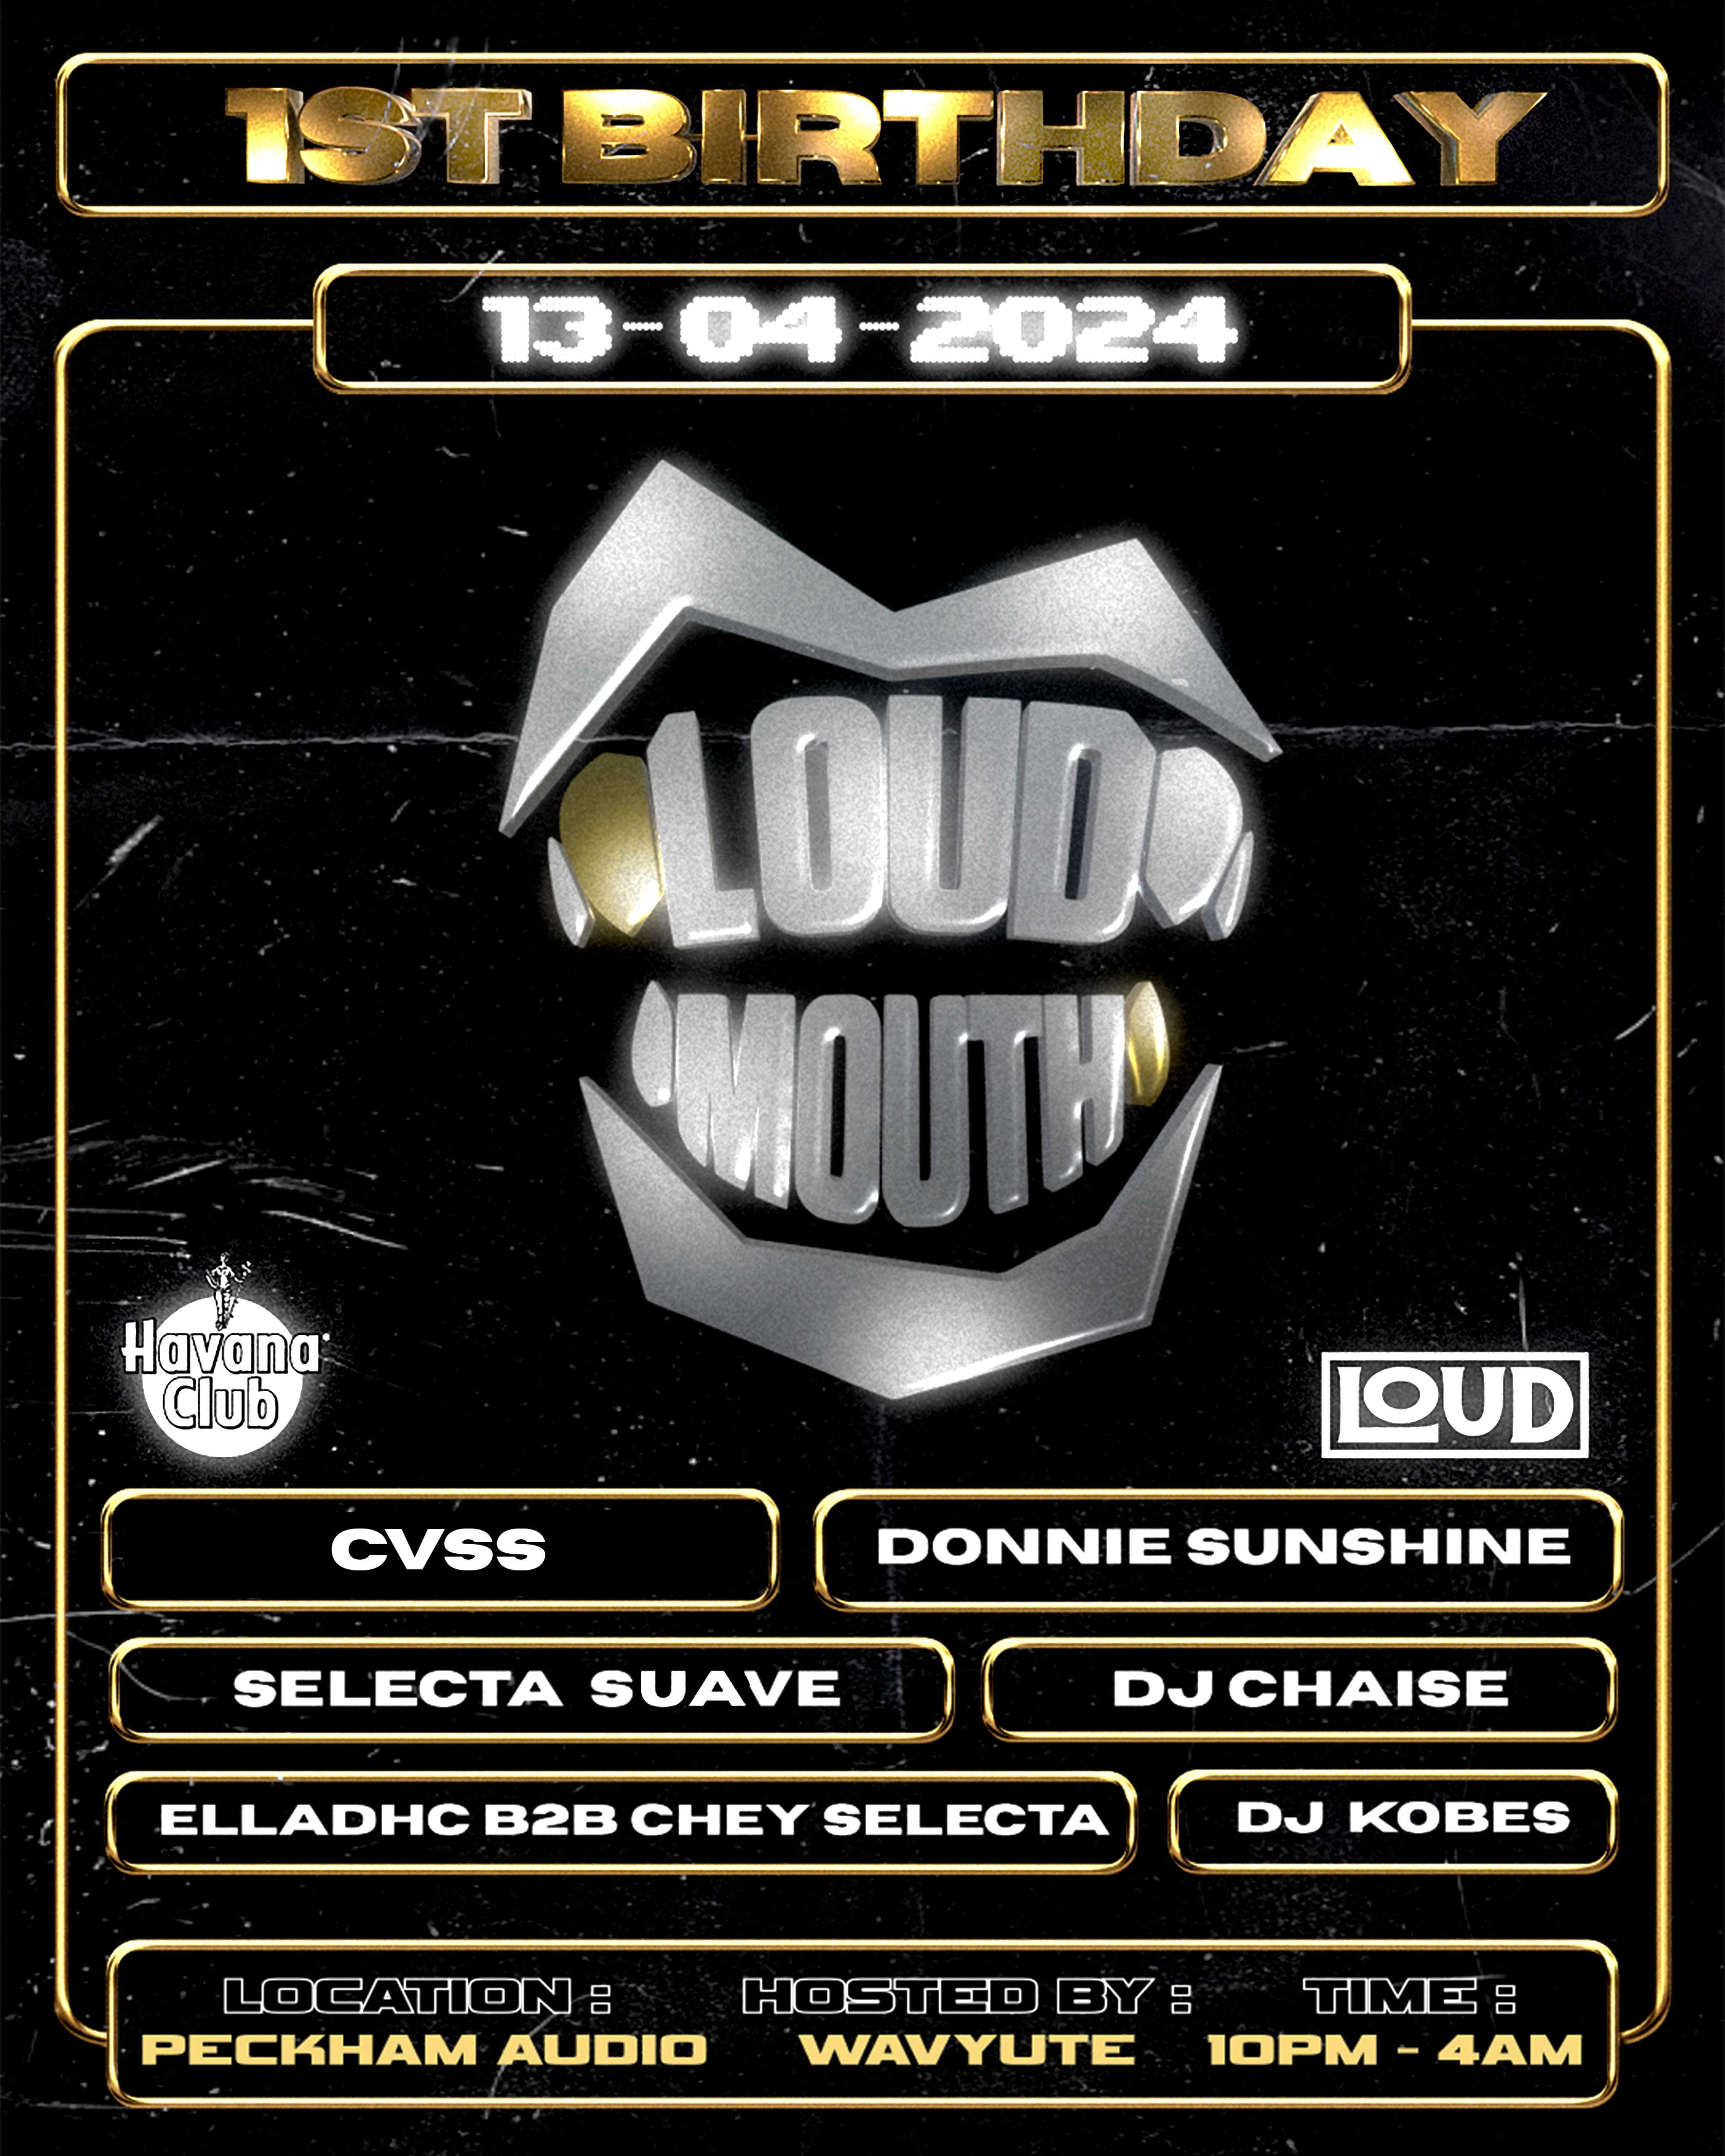 SOLD OUT - LOUD MOUTH LDN: 1st Birthday Event with CVSS, Donnie Sunshine, DJ Chaise, ELLADHC  - Página frontal